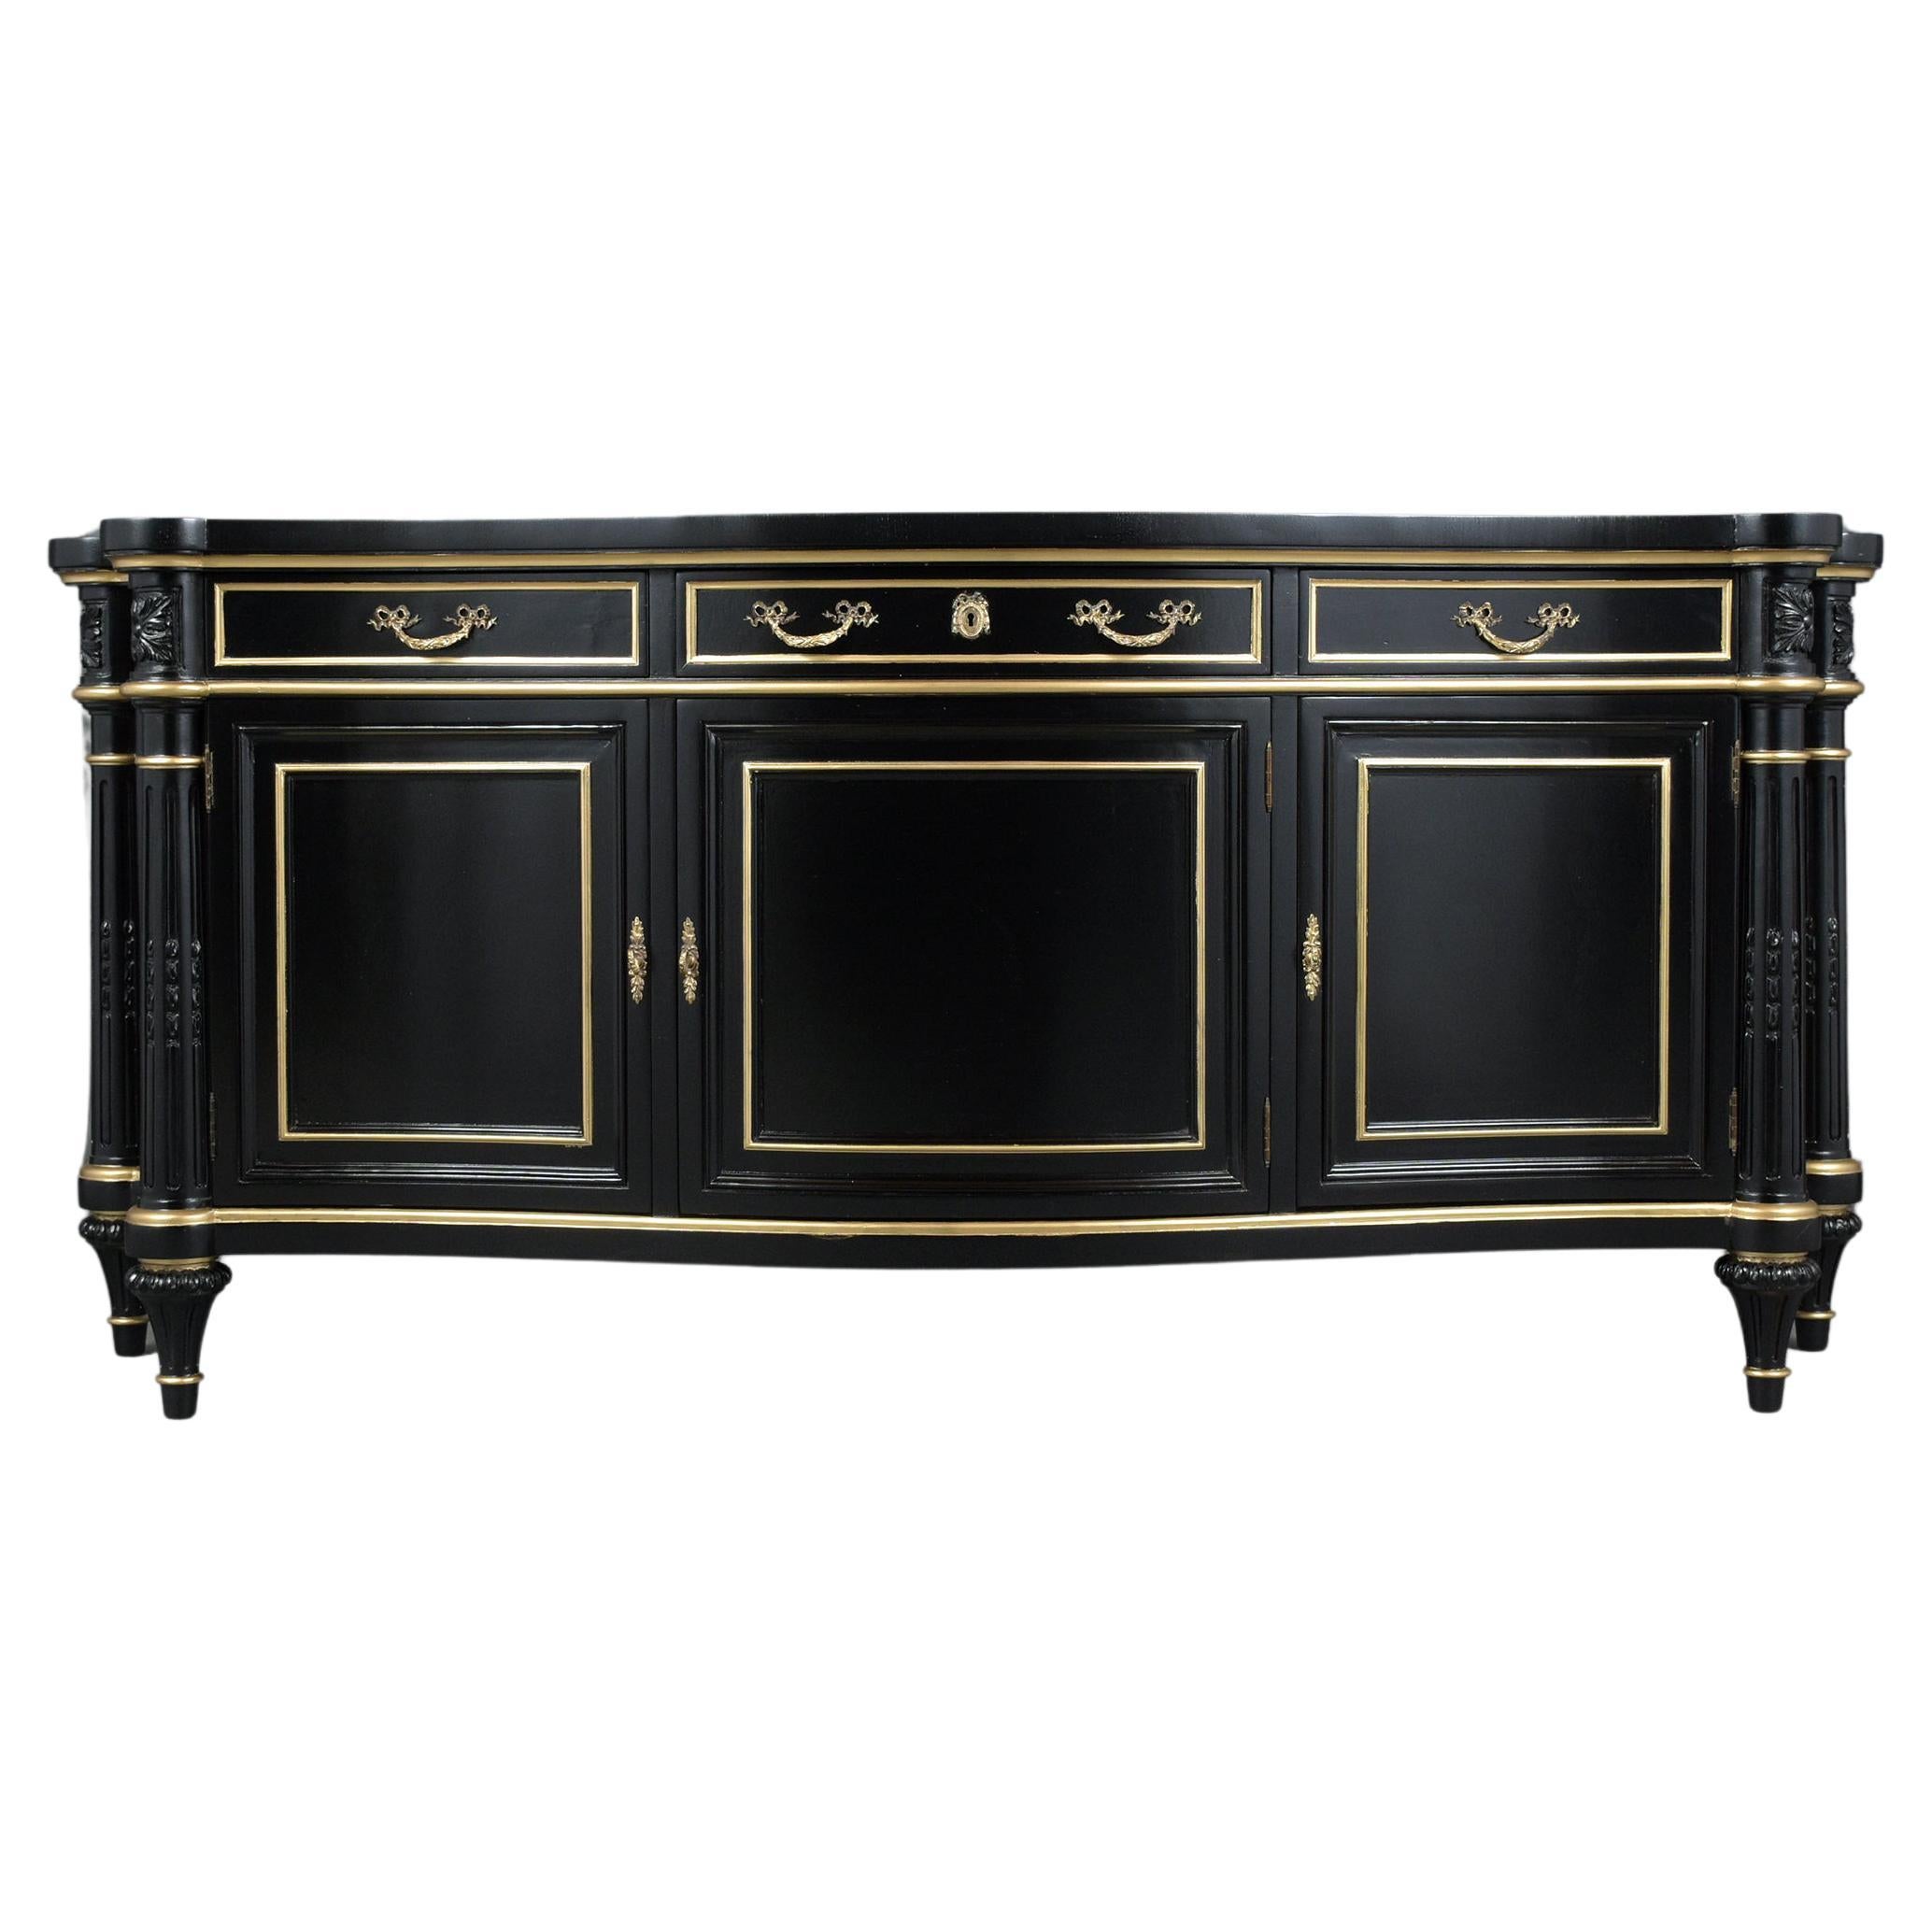 An extraordinary Louis XVI style 1950s server hand-crafted out of mahogany wood professionally restored by our craftsmen team. This buffet features new elegant ebonized color and gilt molding accents details with a lacquer finish, a serpentine top